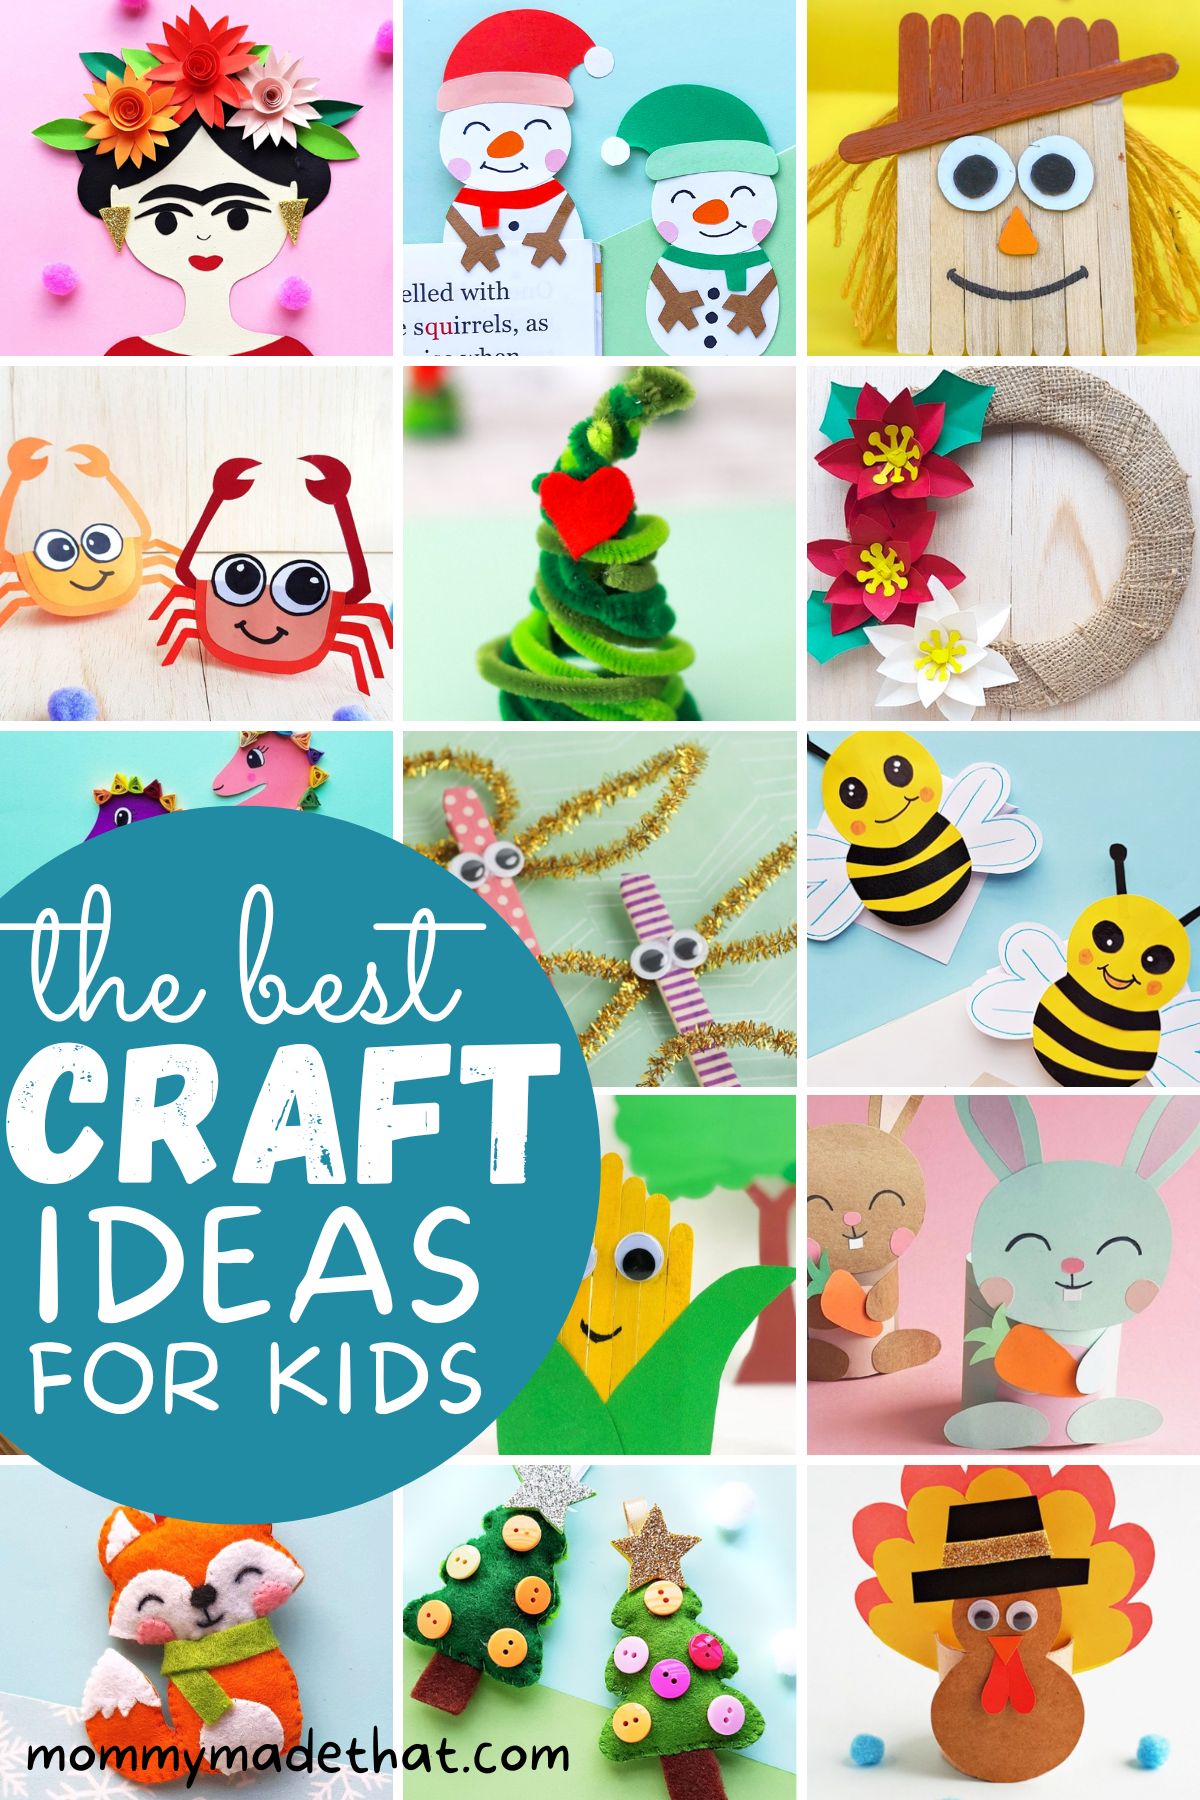 100+ Easy Crafts for Kids (Lots of Arts and Craft Ideas!)